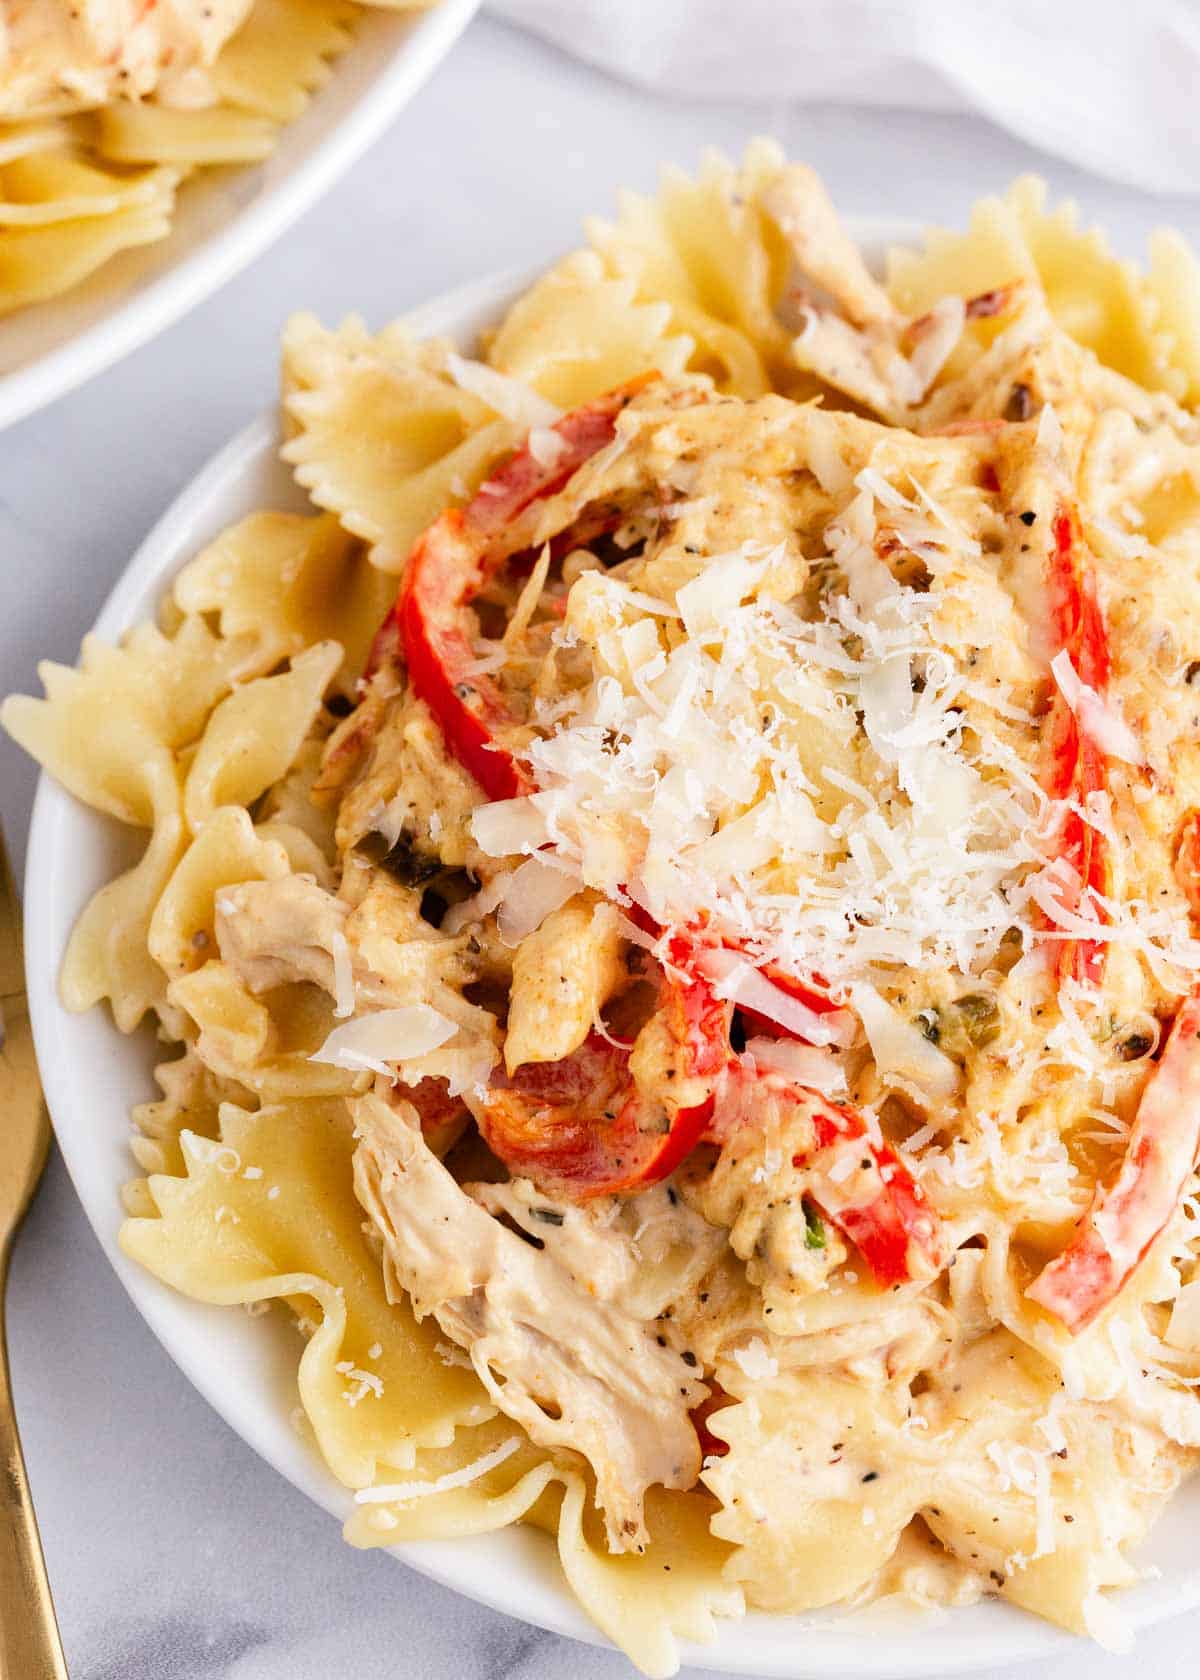 Creamy chicken pasta with peppers on white plate.